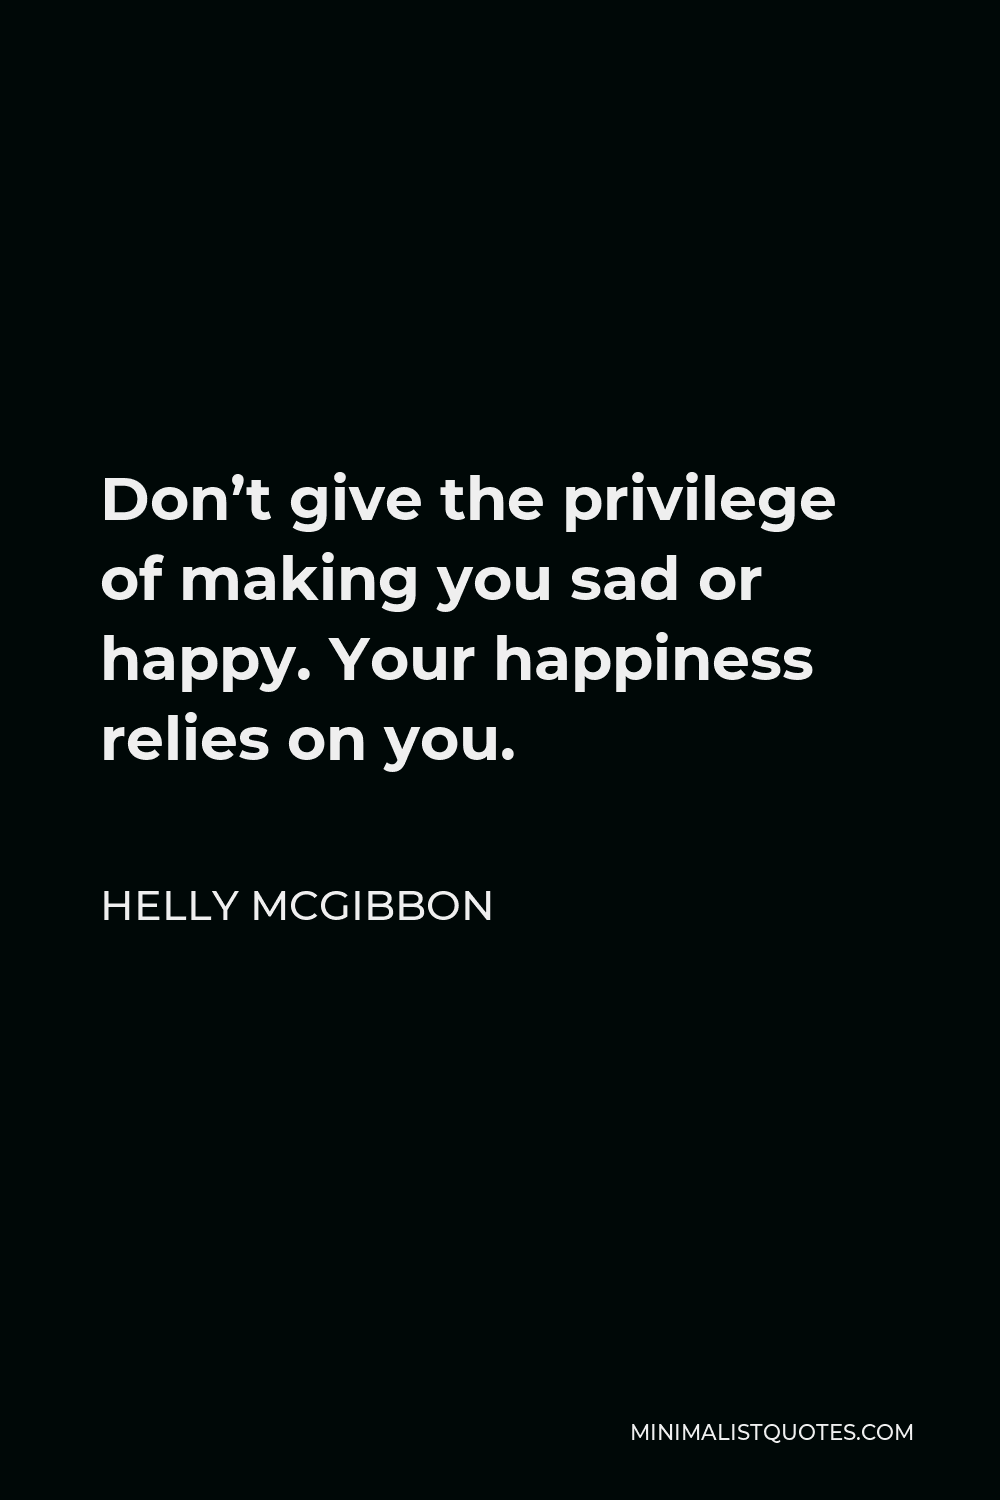 Helly McGibbon Quote - Don’t give the privilege of making you sad or happy. Your happiness relies on you.